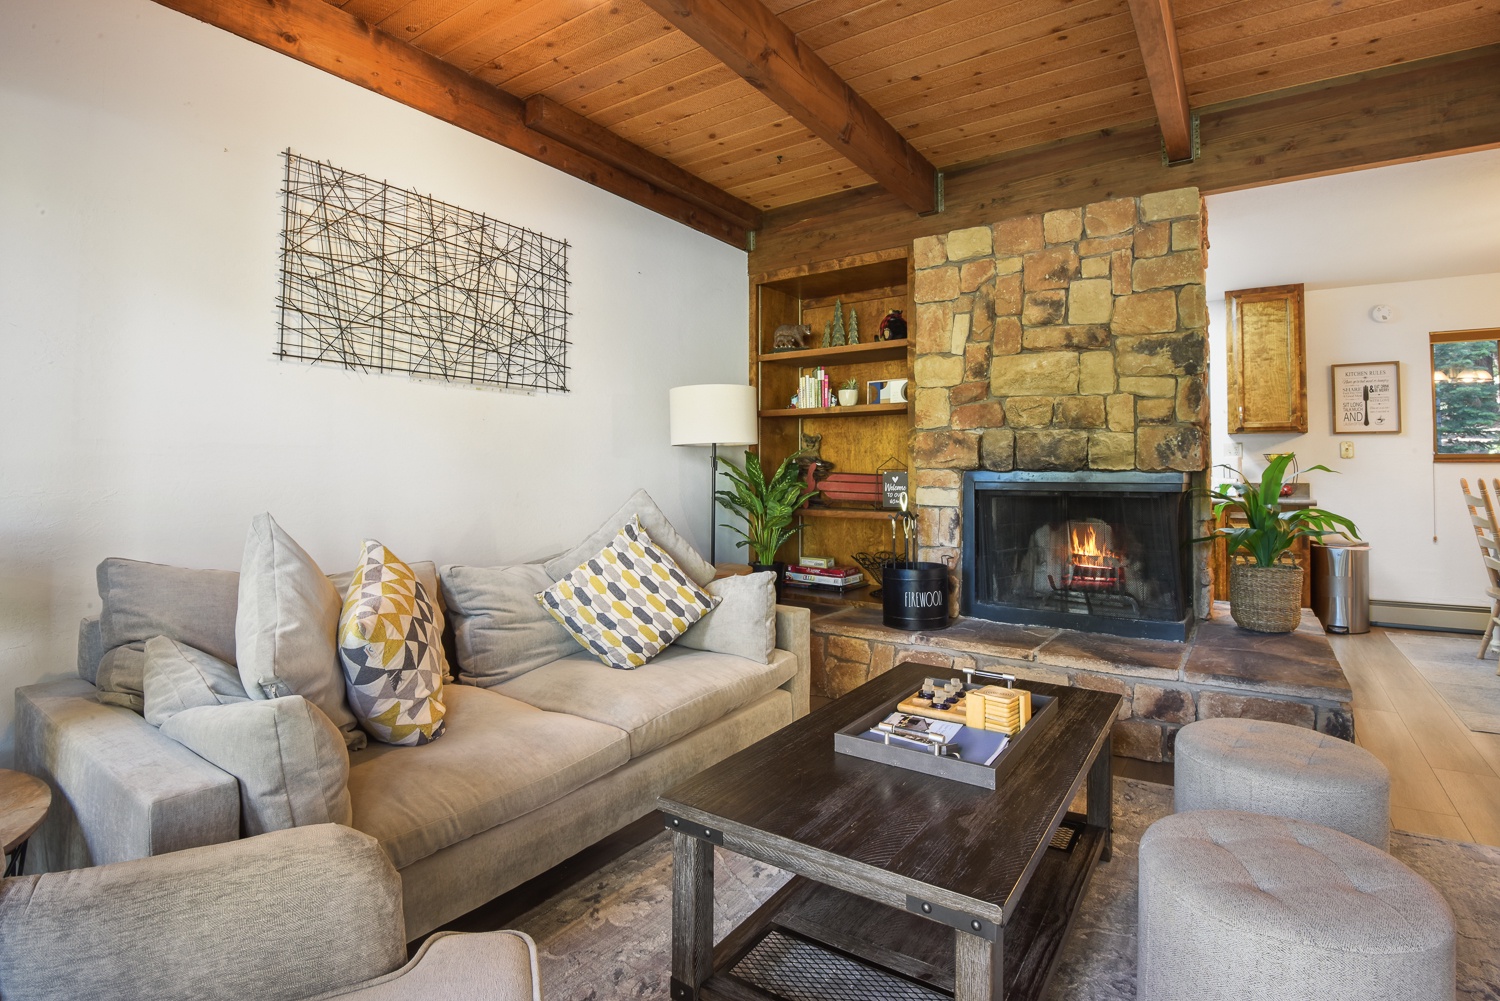 Unit #3: Curl up for a snooze or a movie by the fire in the elegant, plush living room